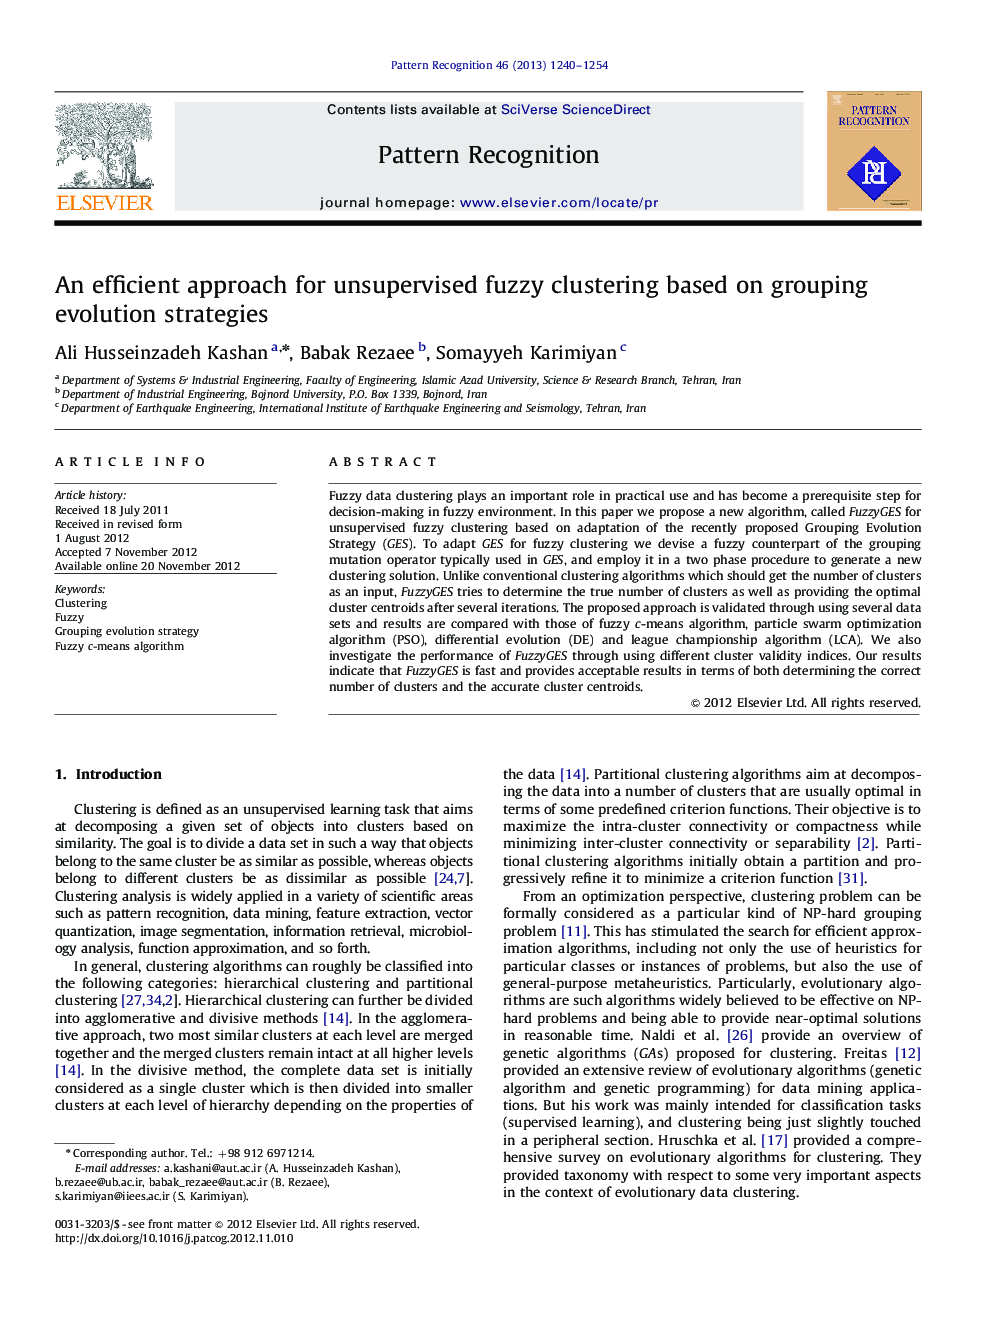 An efficient approach for unsupervised fuzzy clustering based on grouping evolution strategies